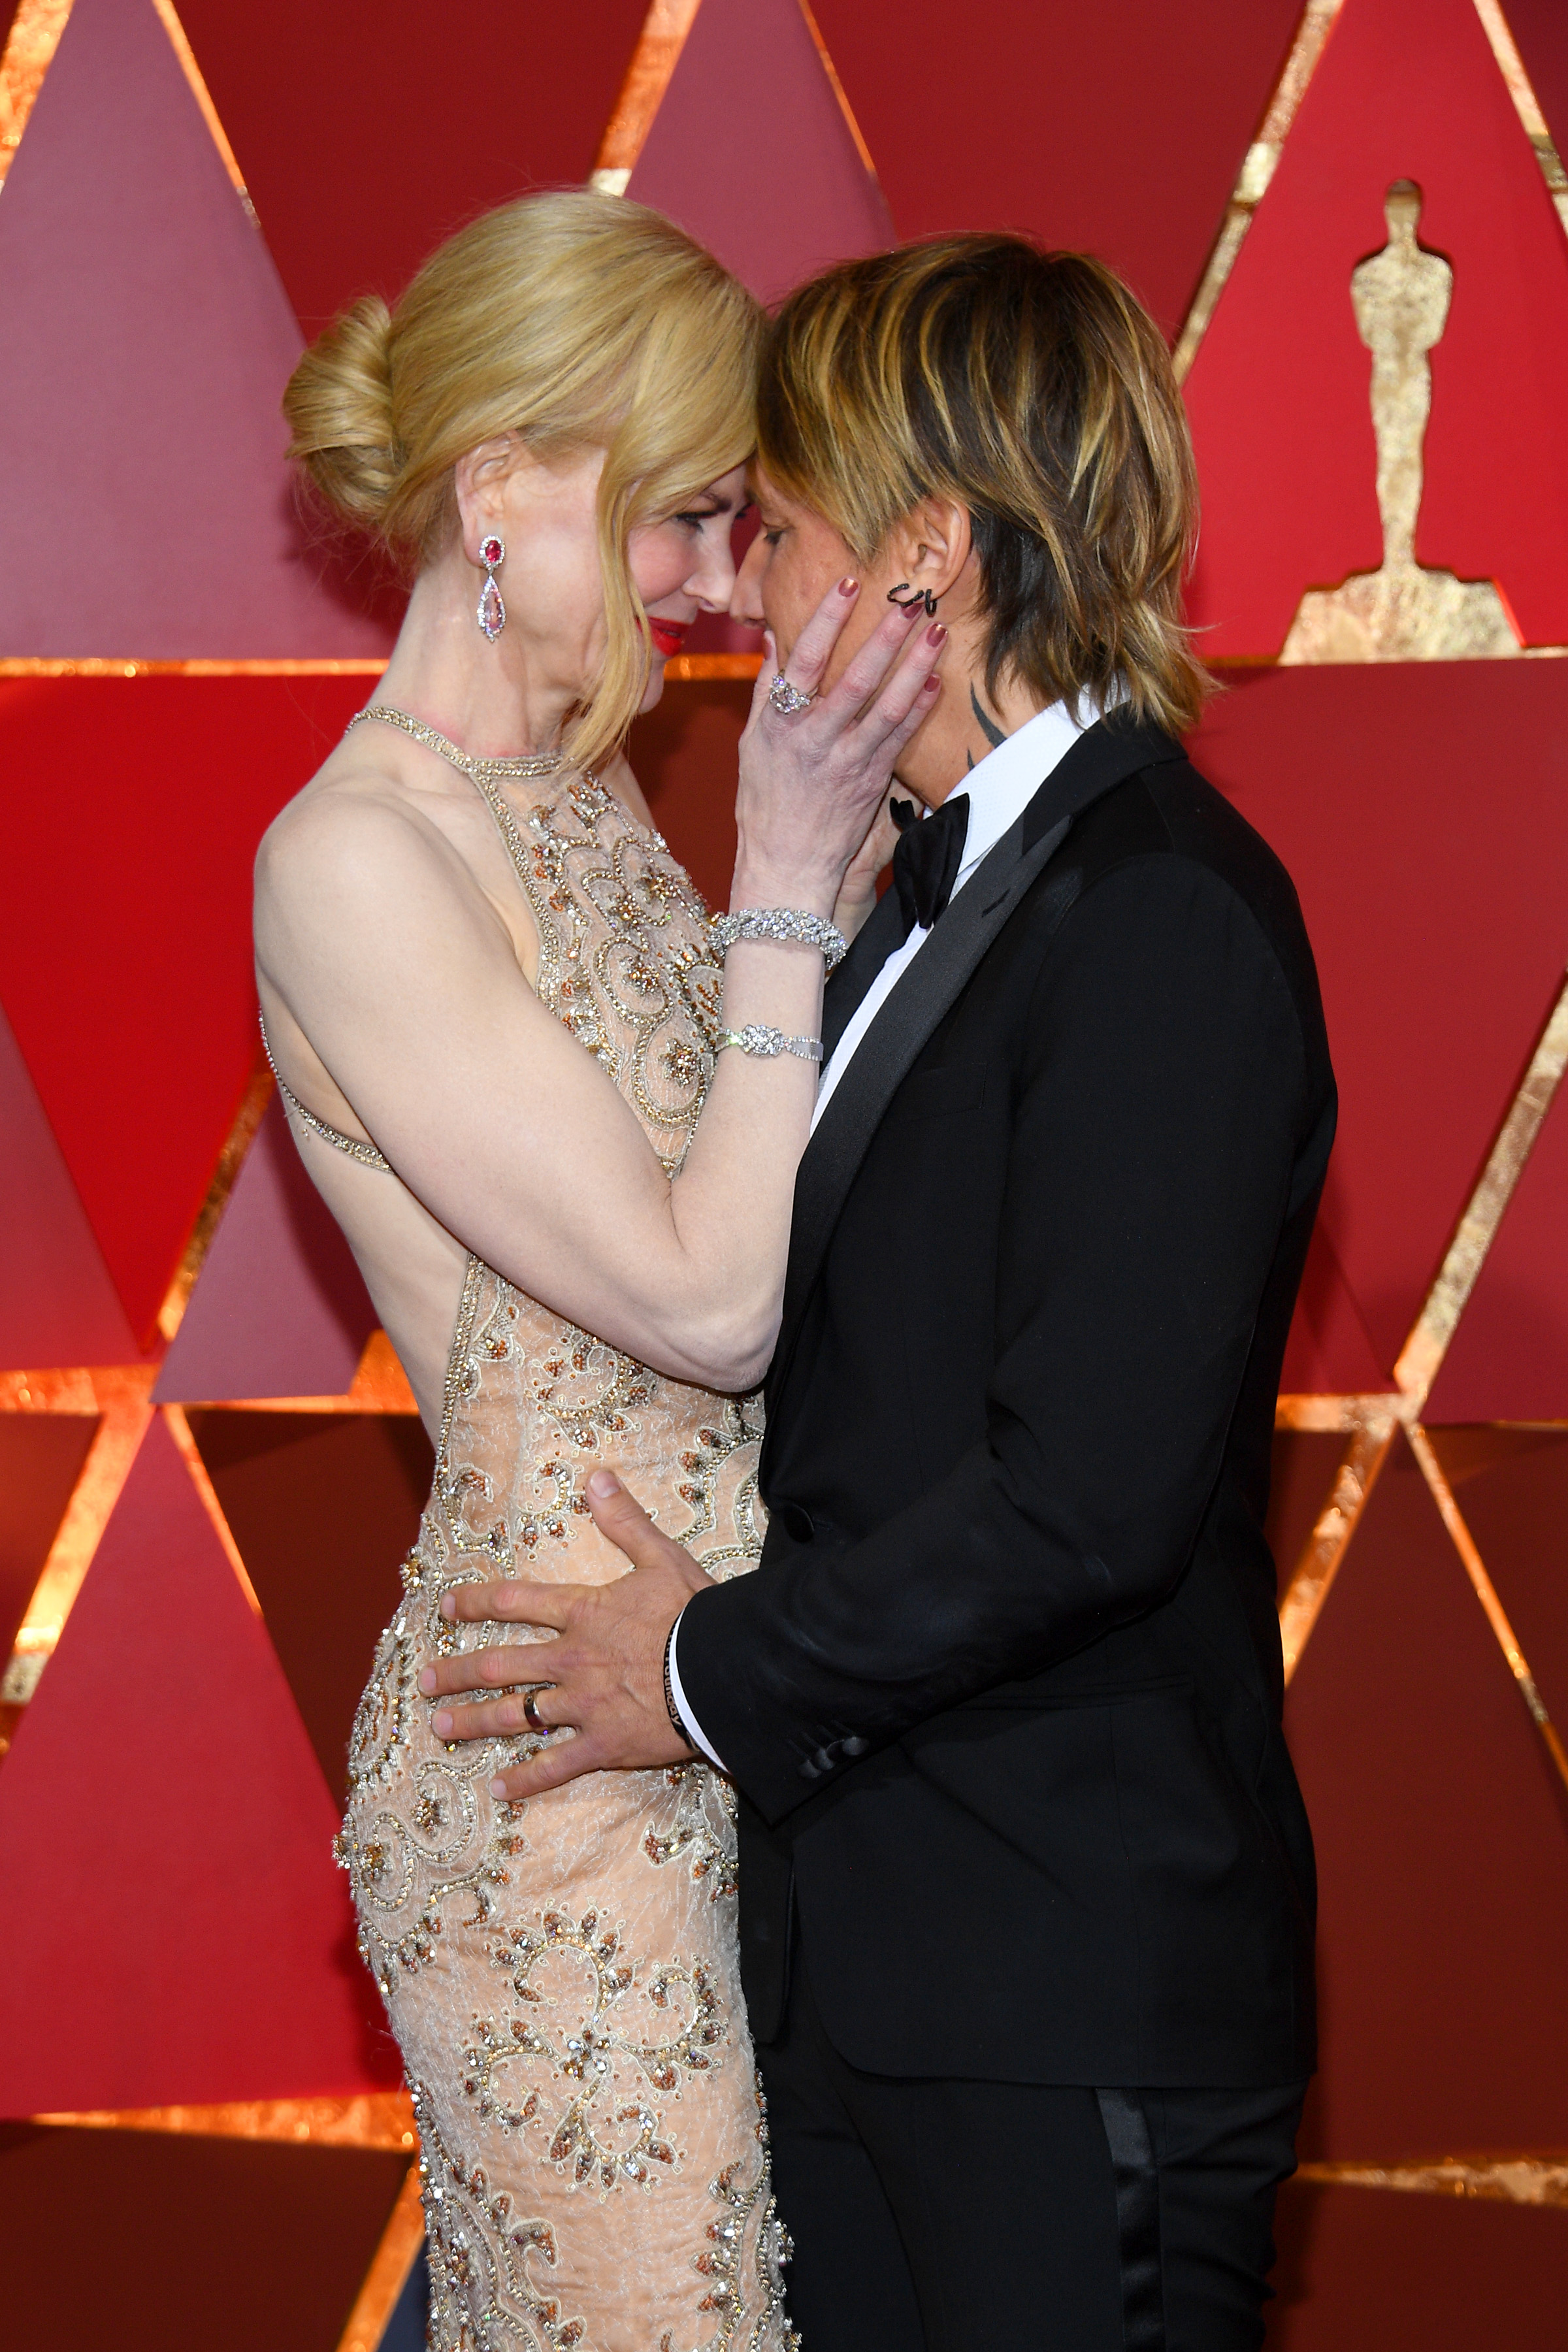 Nicole Kidman and musician Keith Urban attends the 89th Annual Academy Awards at Hollywood & Highland Center on February 26, 2017 in Hollywood, California. | Source: Getty Images